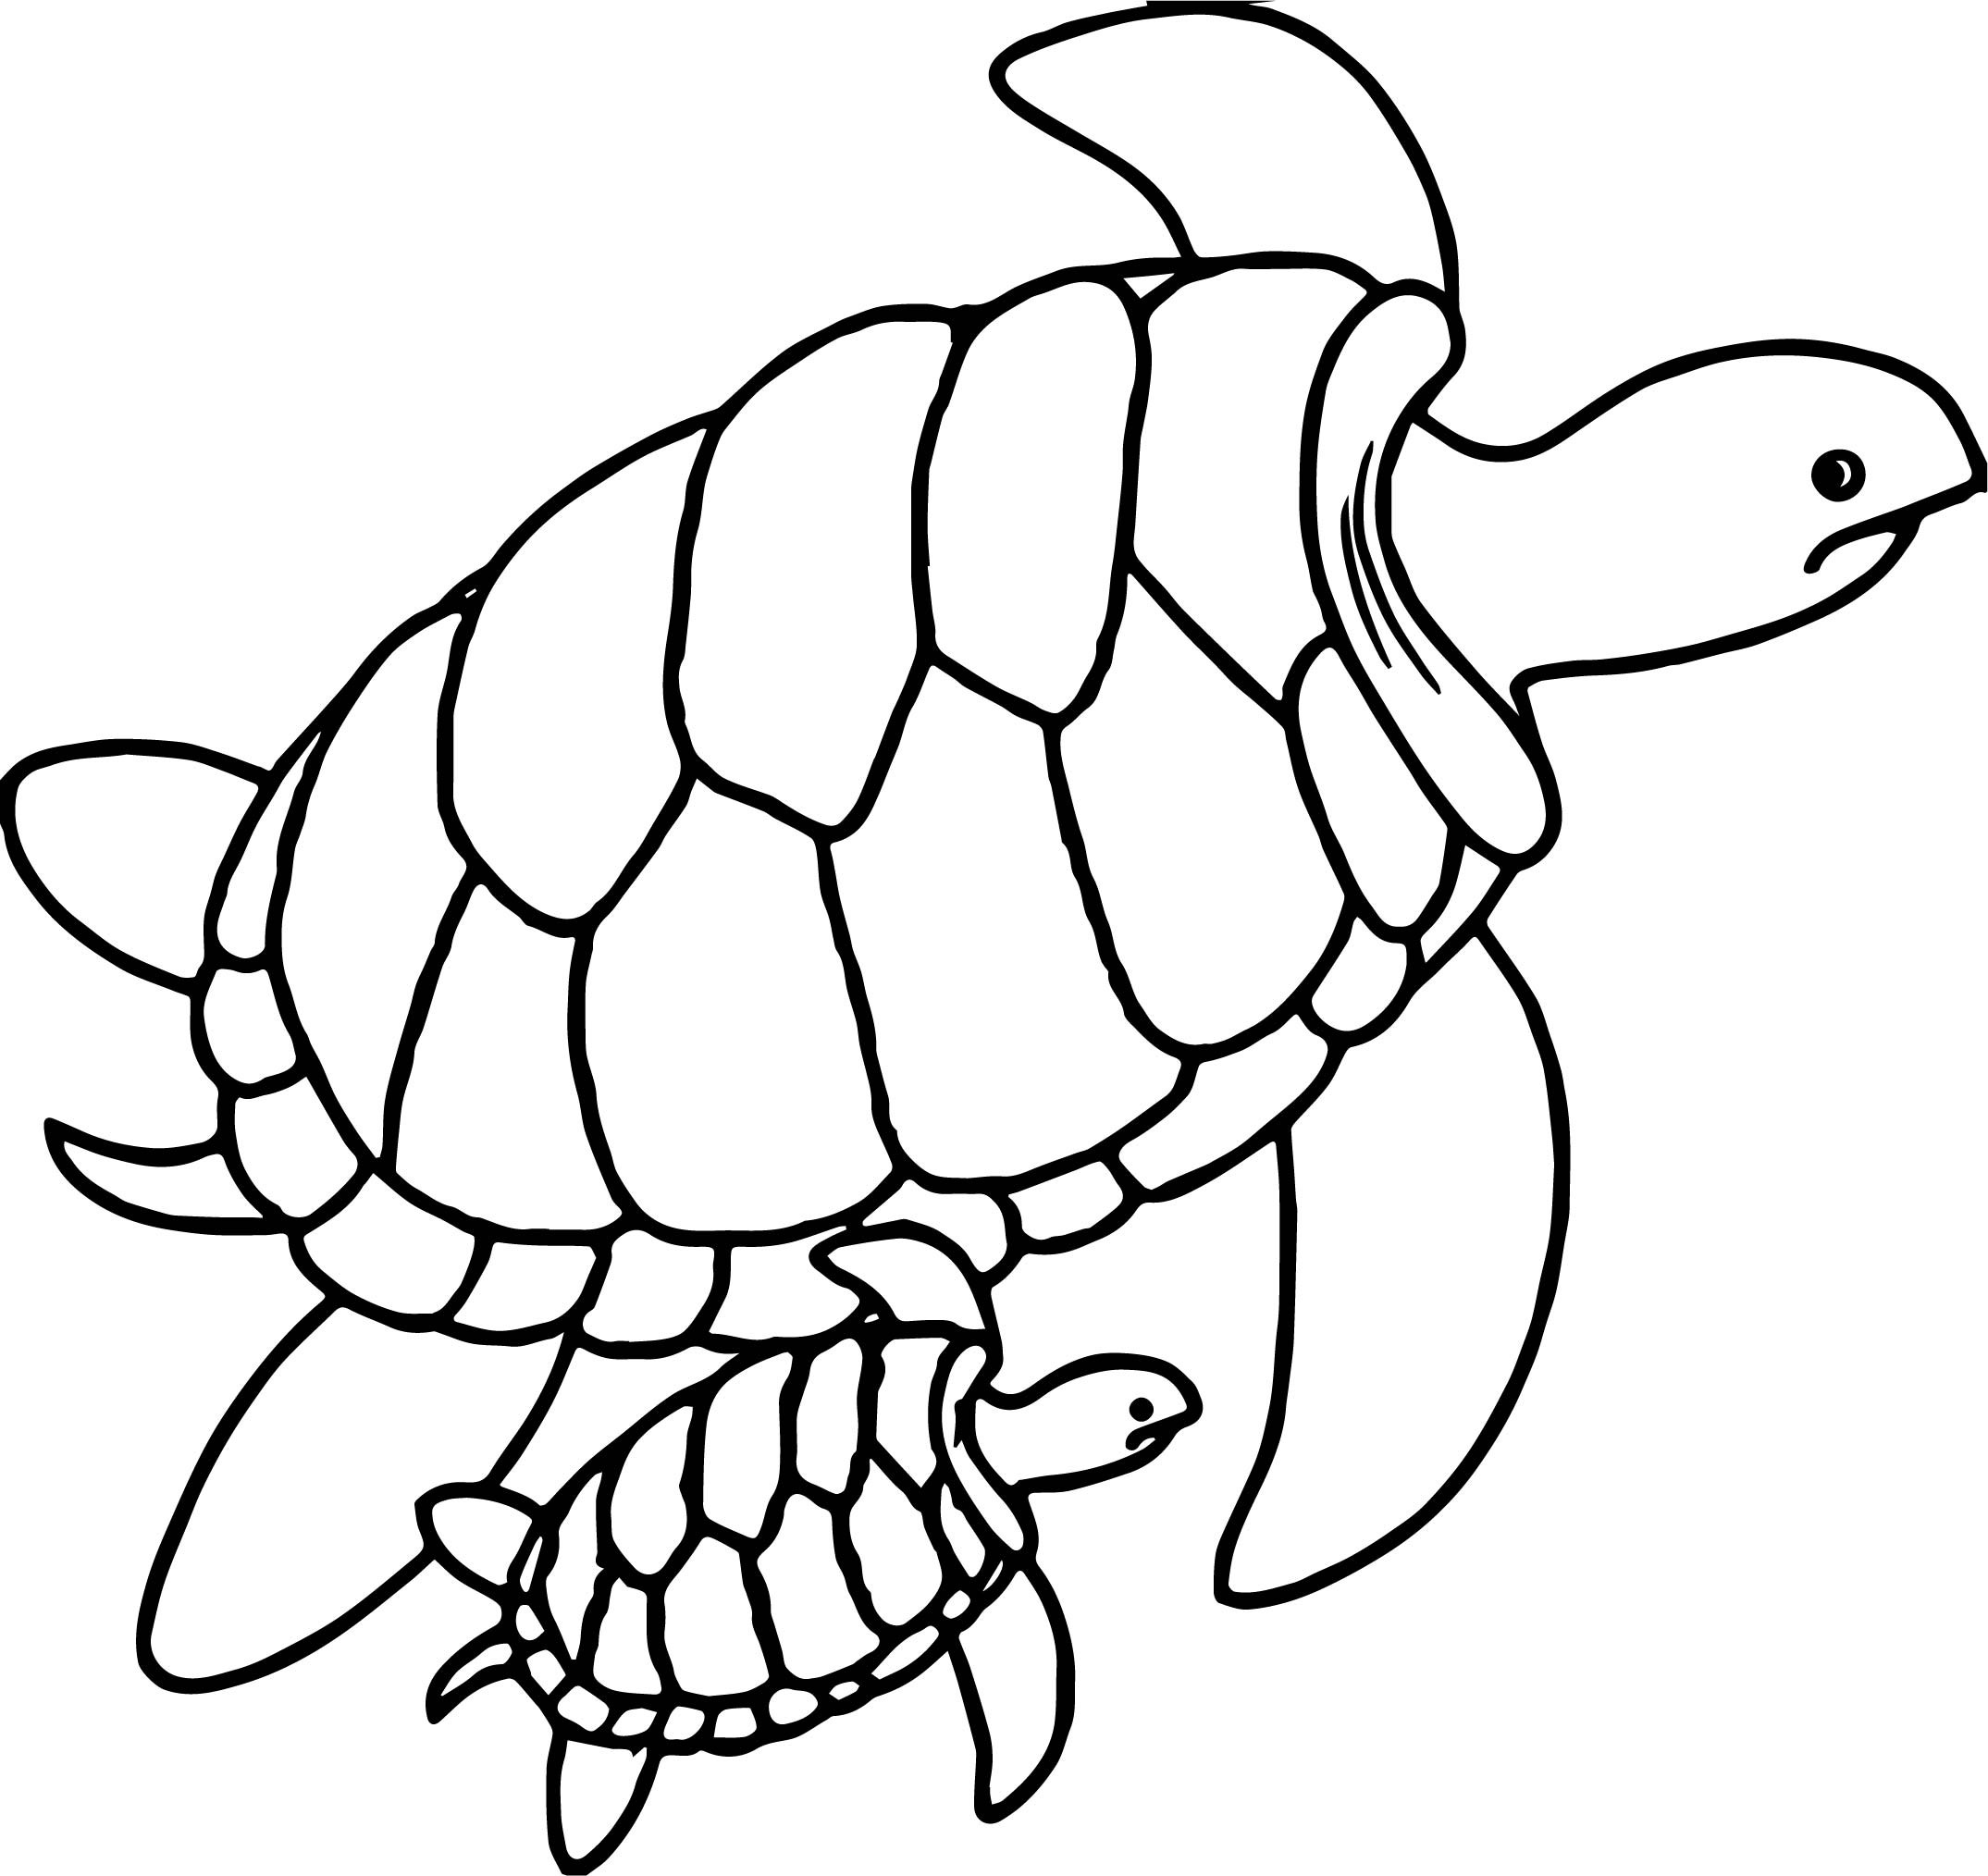 Baby Turtle Coloring Page
 Cute Sea Turtle Mother And Baby Sea Turtles Swimming